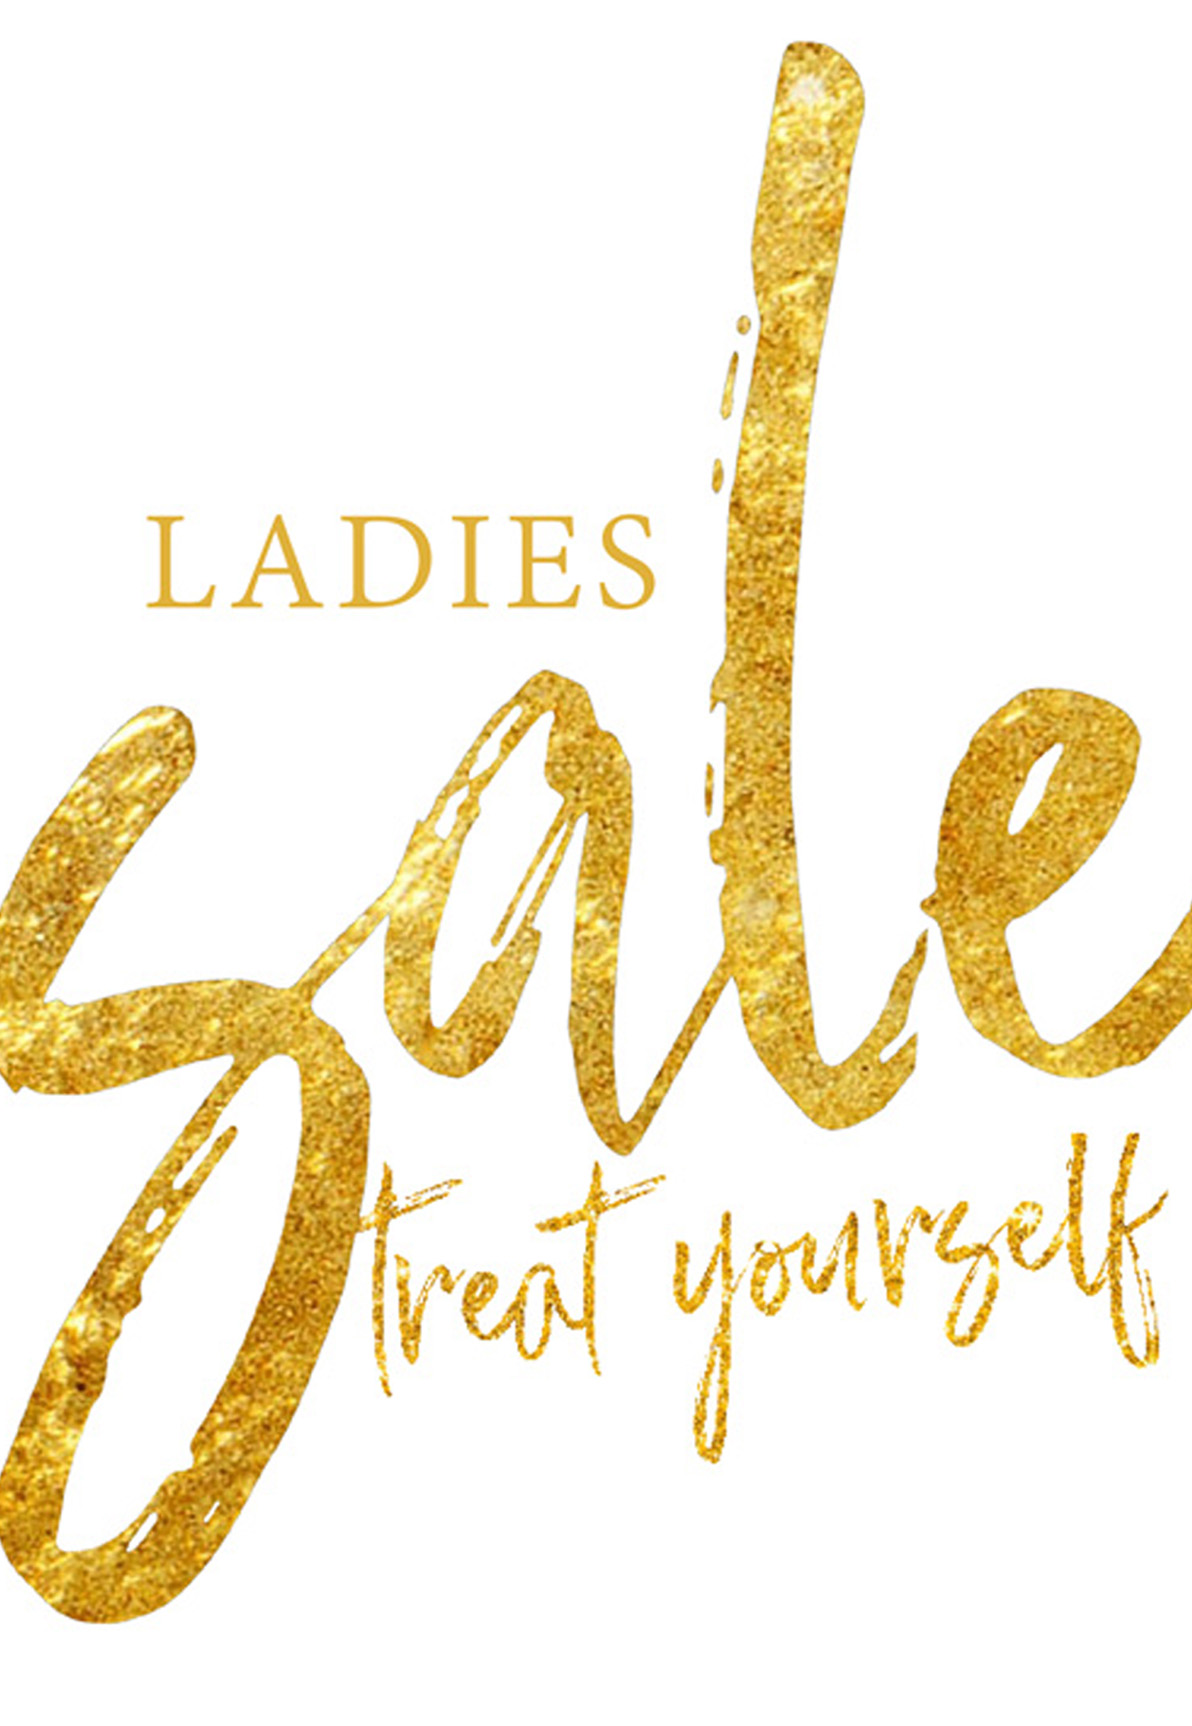 LADIES SALE! Shop the styles you love for less!